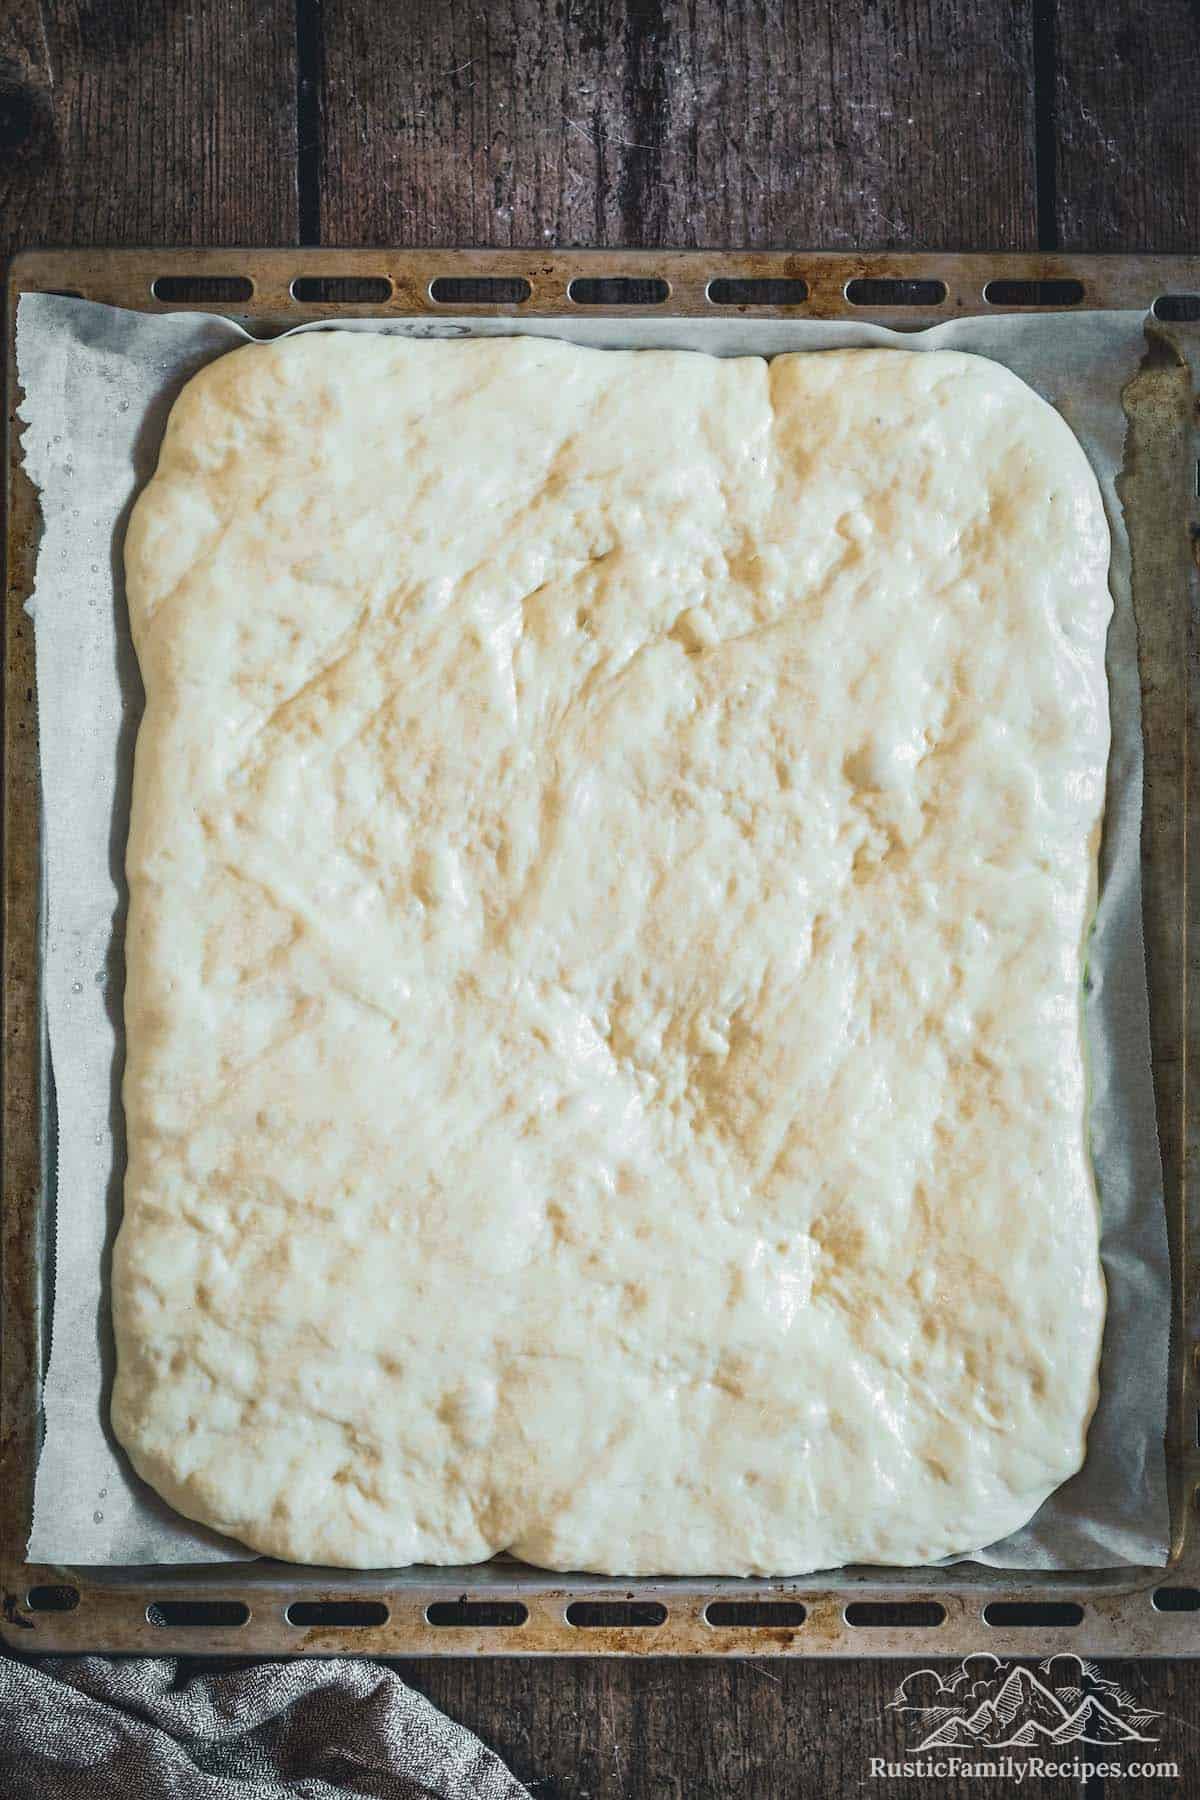 Overhead view of focaccia dough stretched out on baking sheet